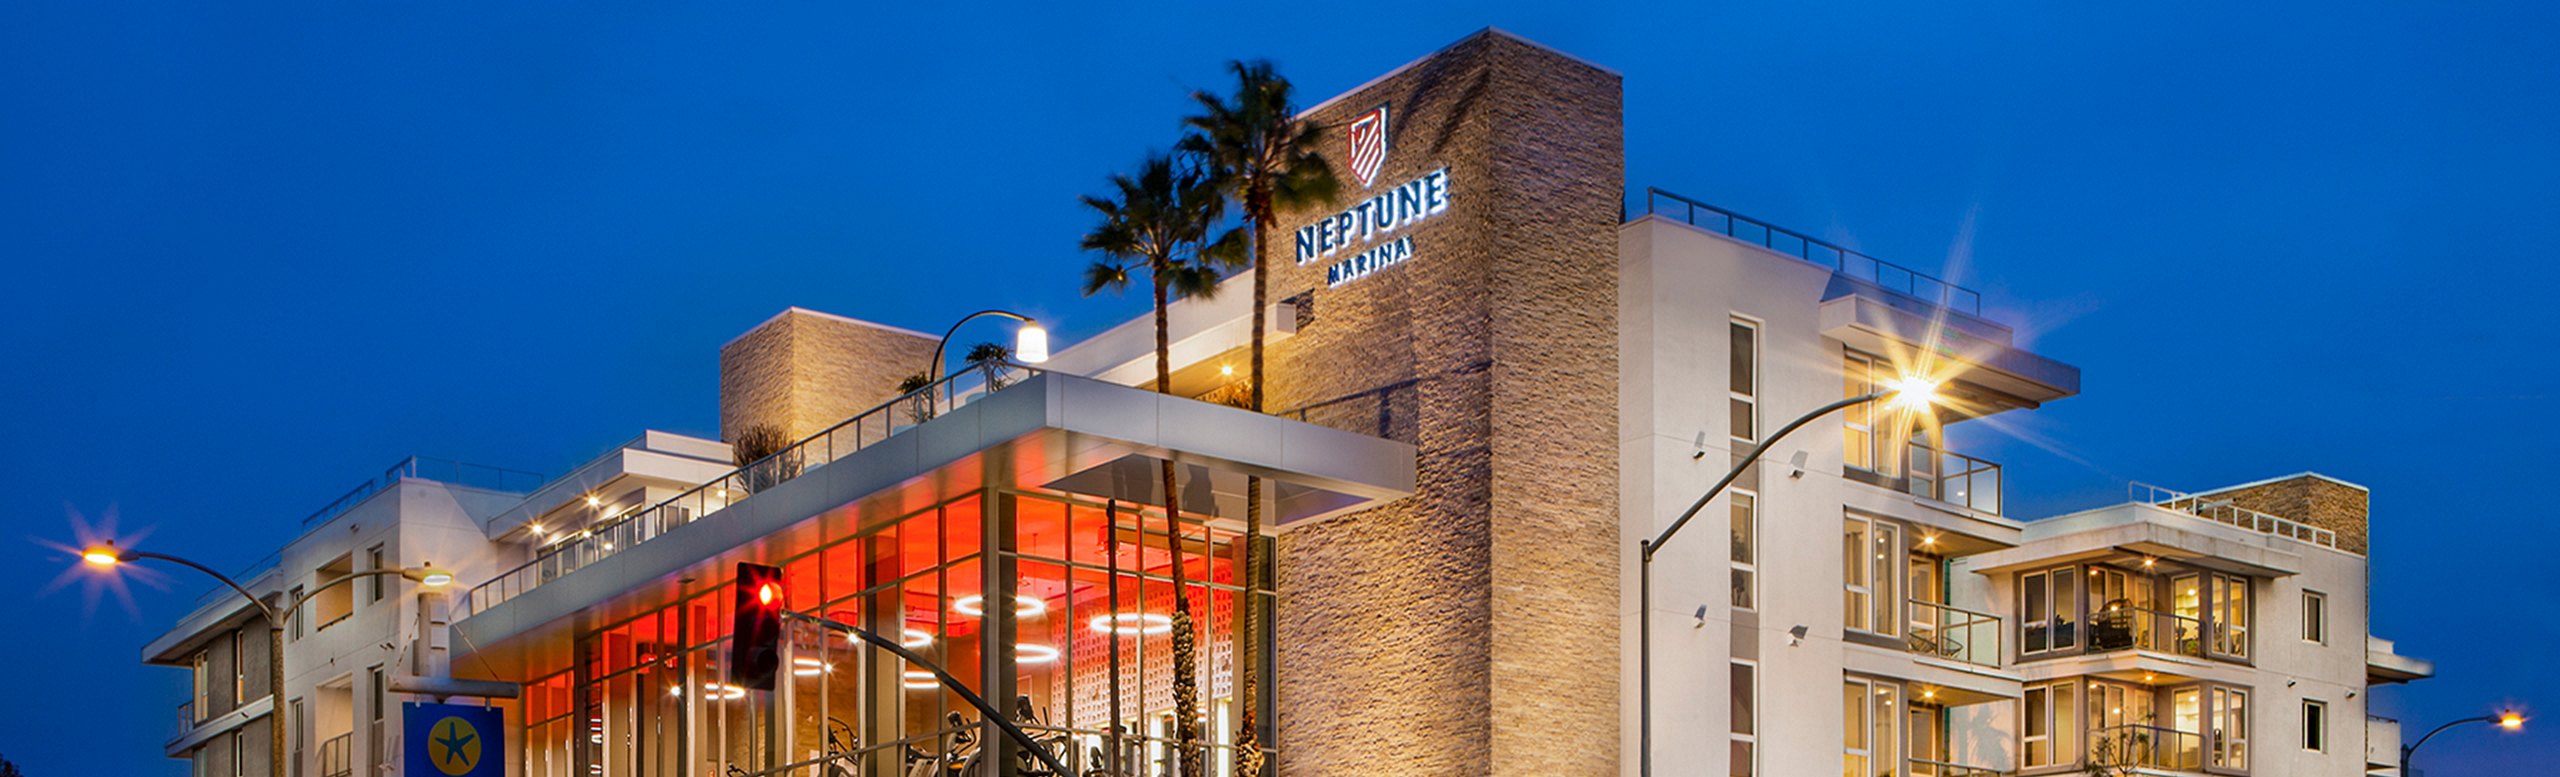 Twilight view of Neptune Marina residential building with illuminated windows and a clear sign, palm trees in the foreground under a dusk sky.